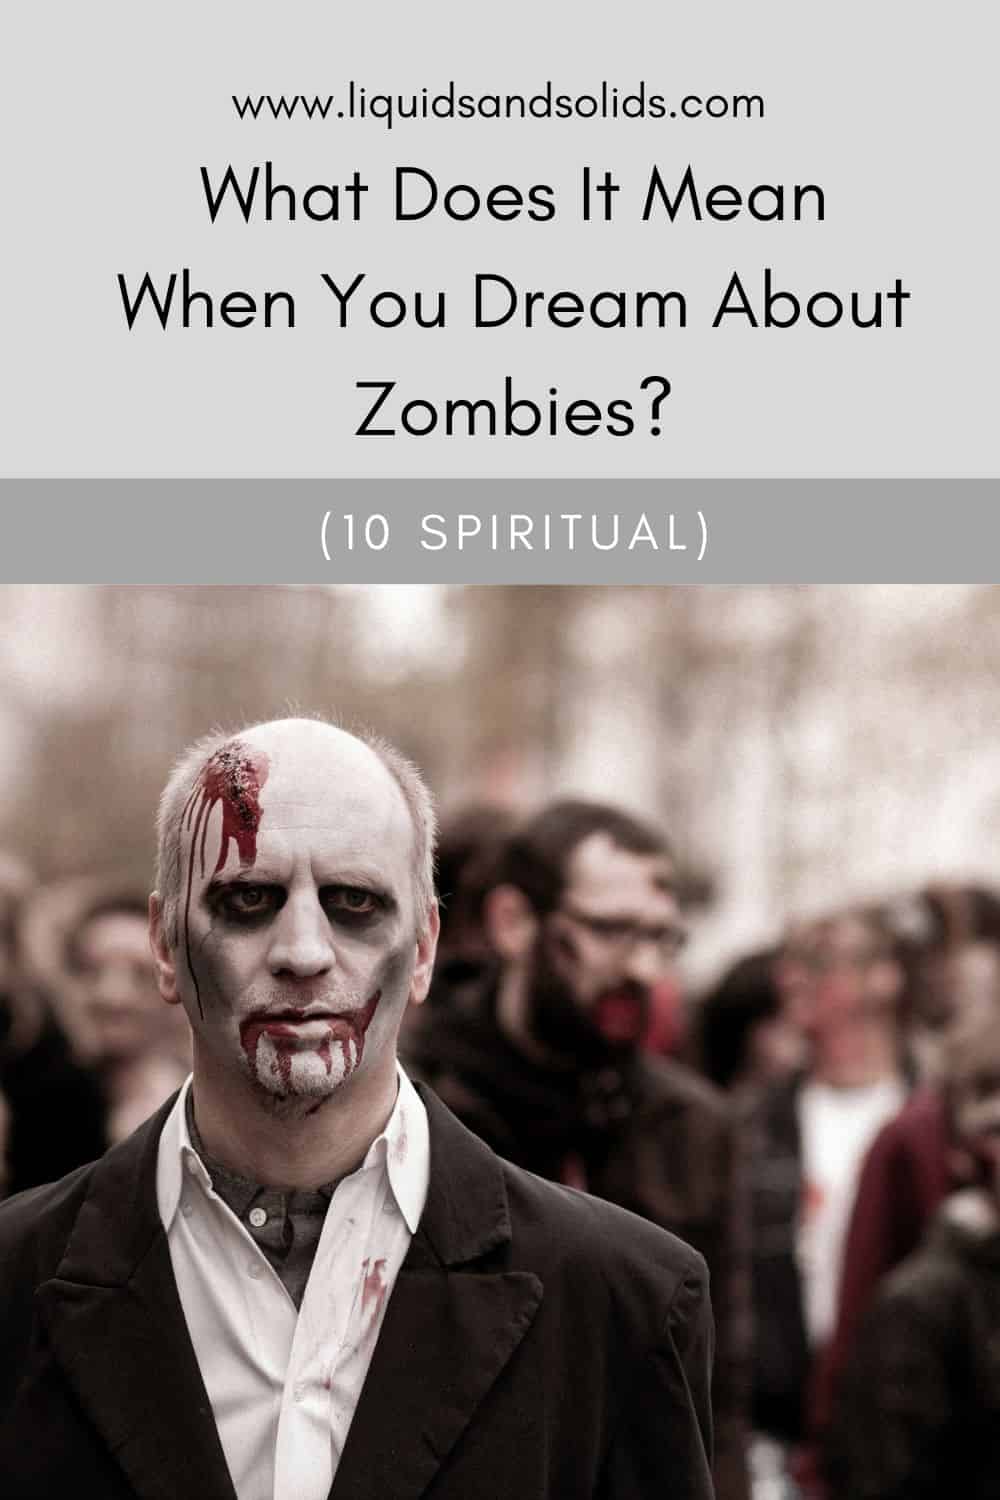 What Does It Mean When You Dream About Zombies? (10 Spiritual)